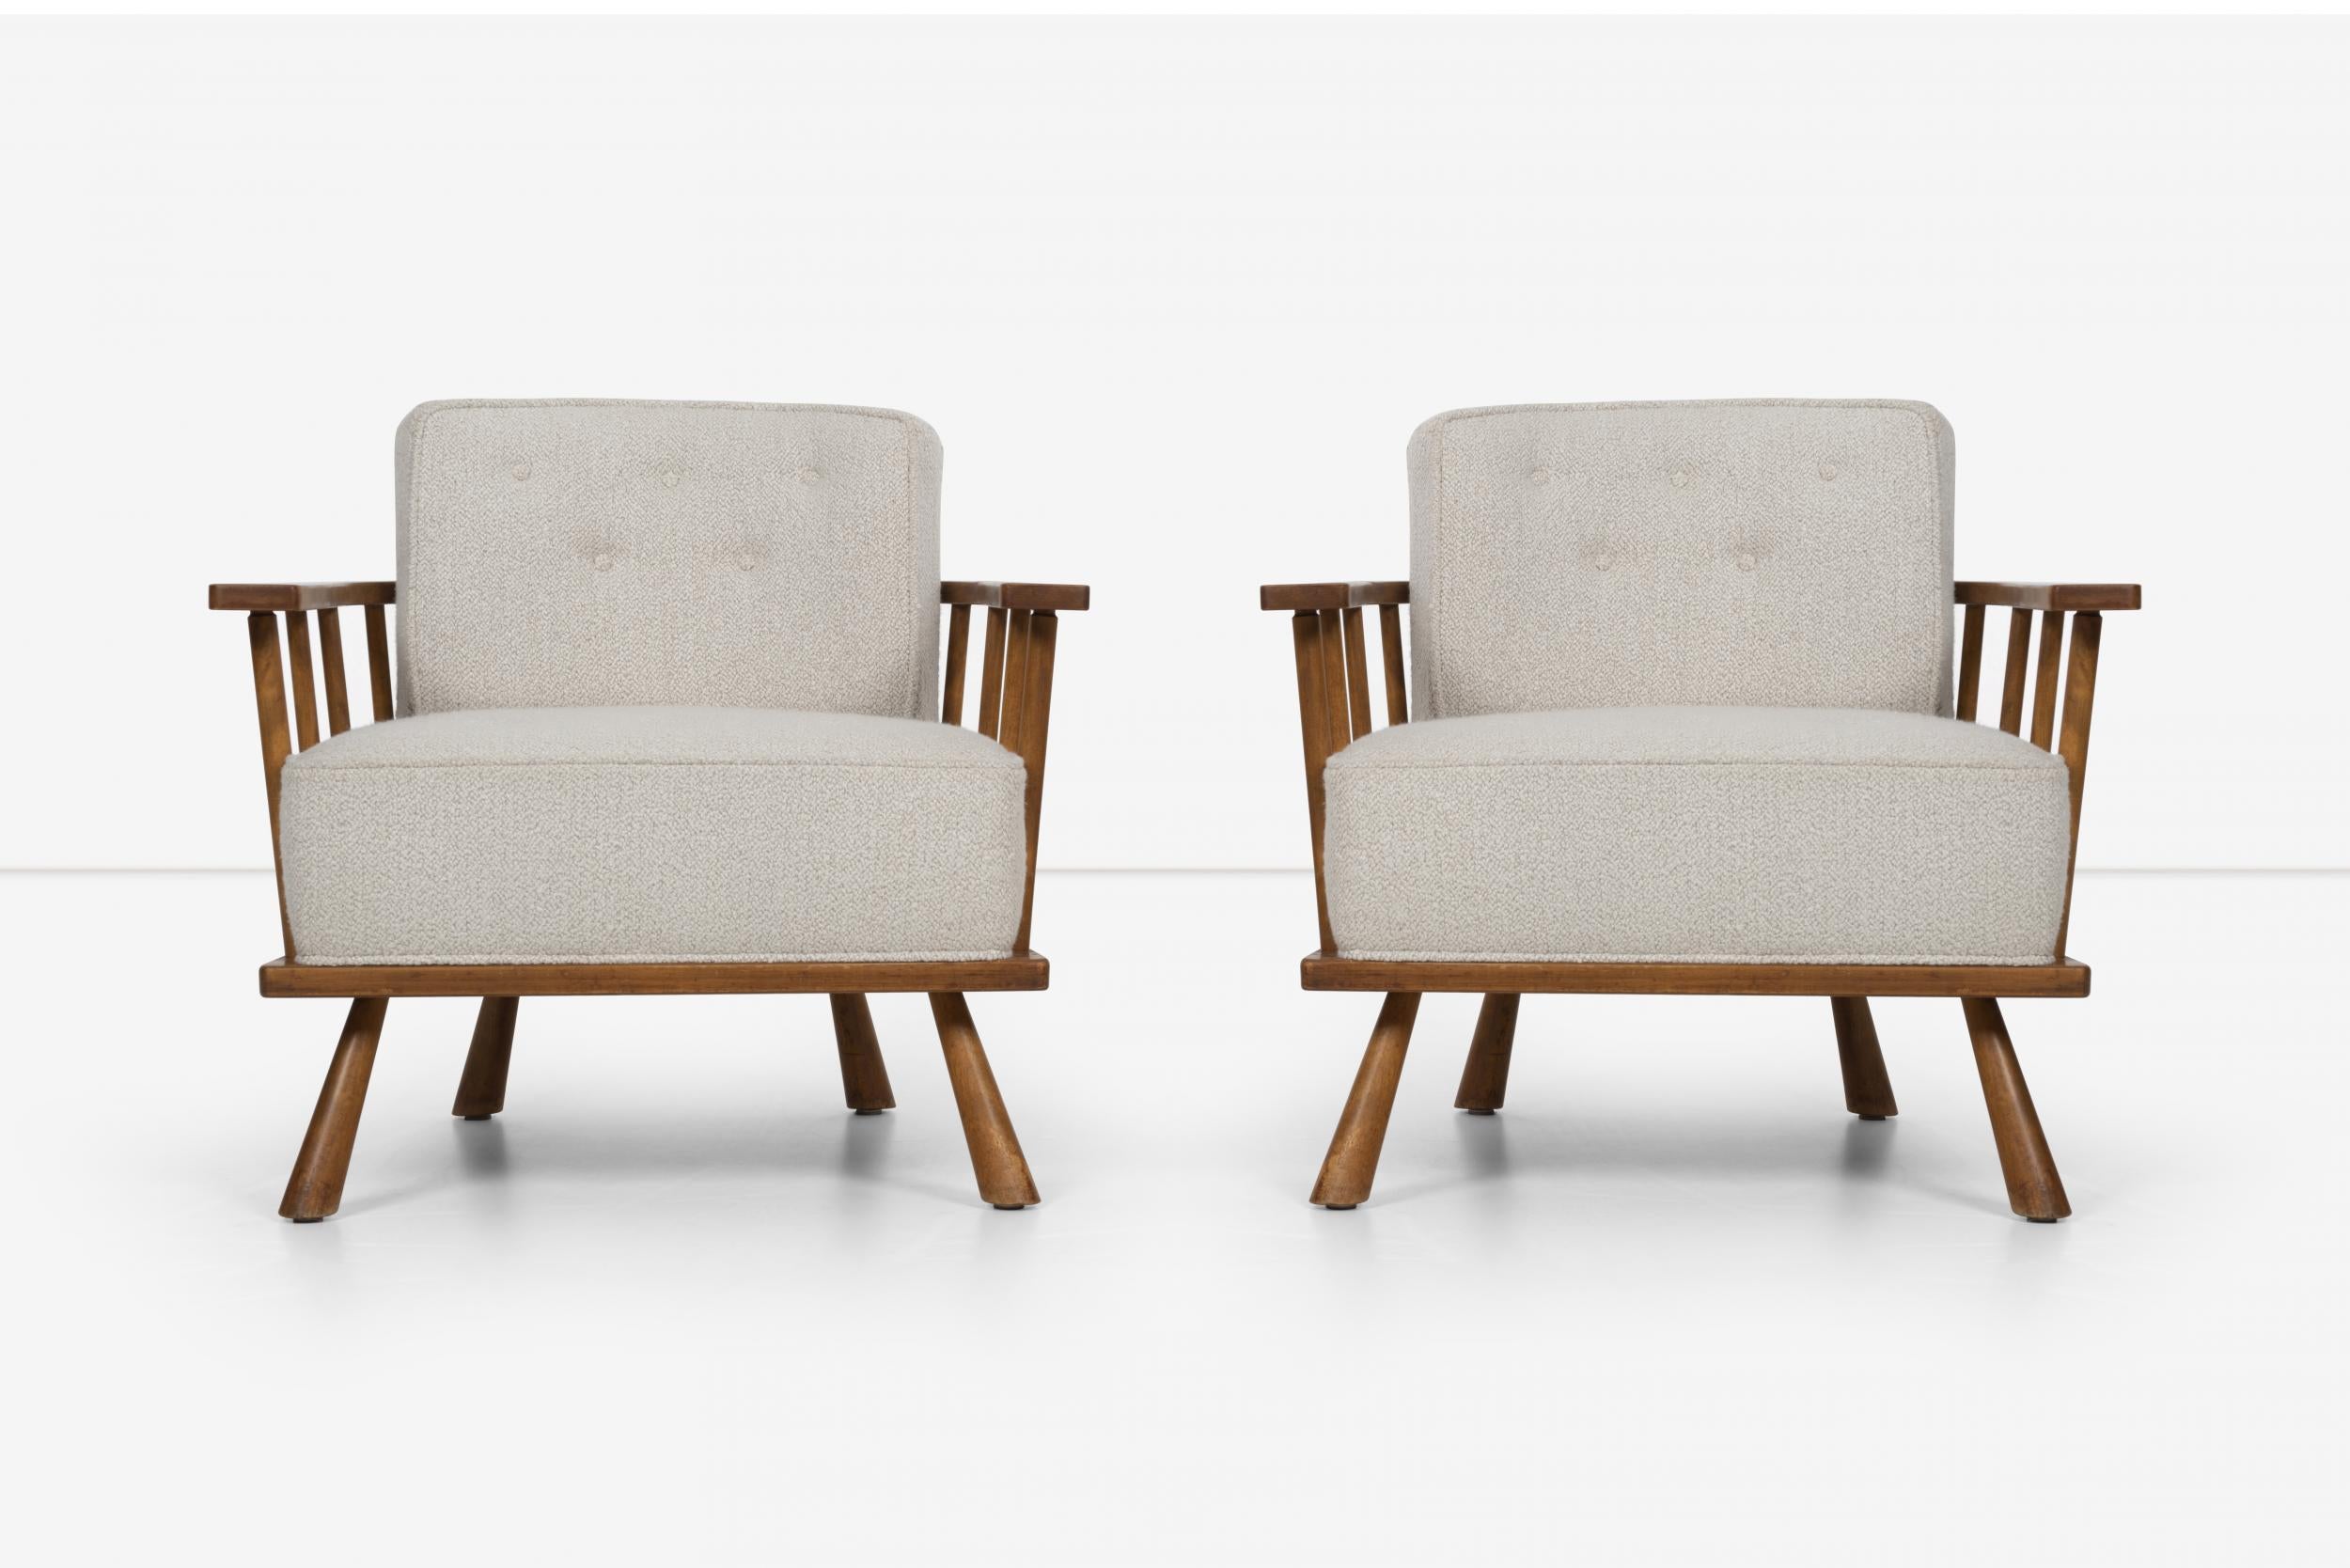 Pair of barrel back lounge chairs by Robsjohn-Gibbings, for Widdicomb, Model 1651. Frame made of solid maple spindles which secure boucle reupholstered button tufted tubs, with solid legs.